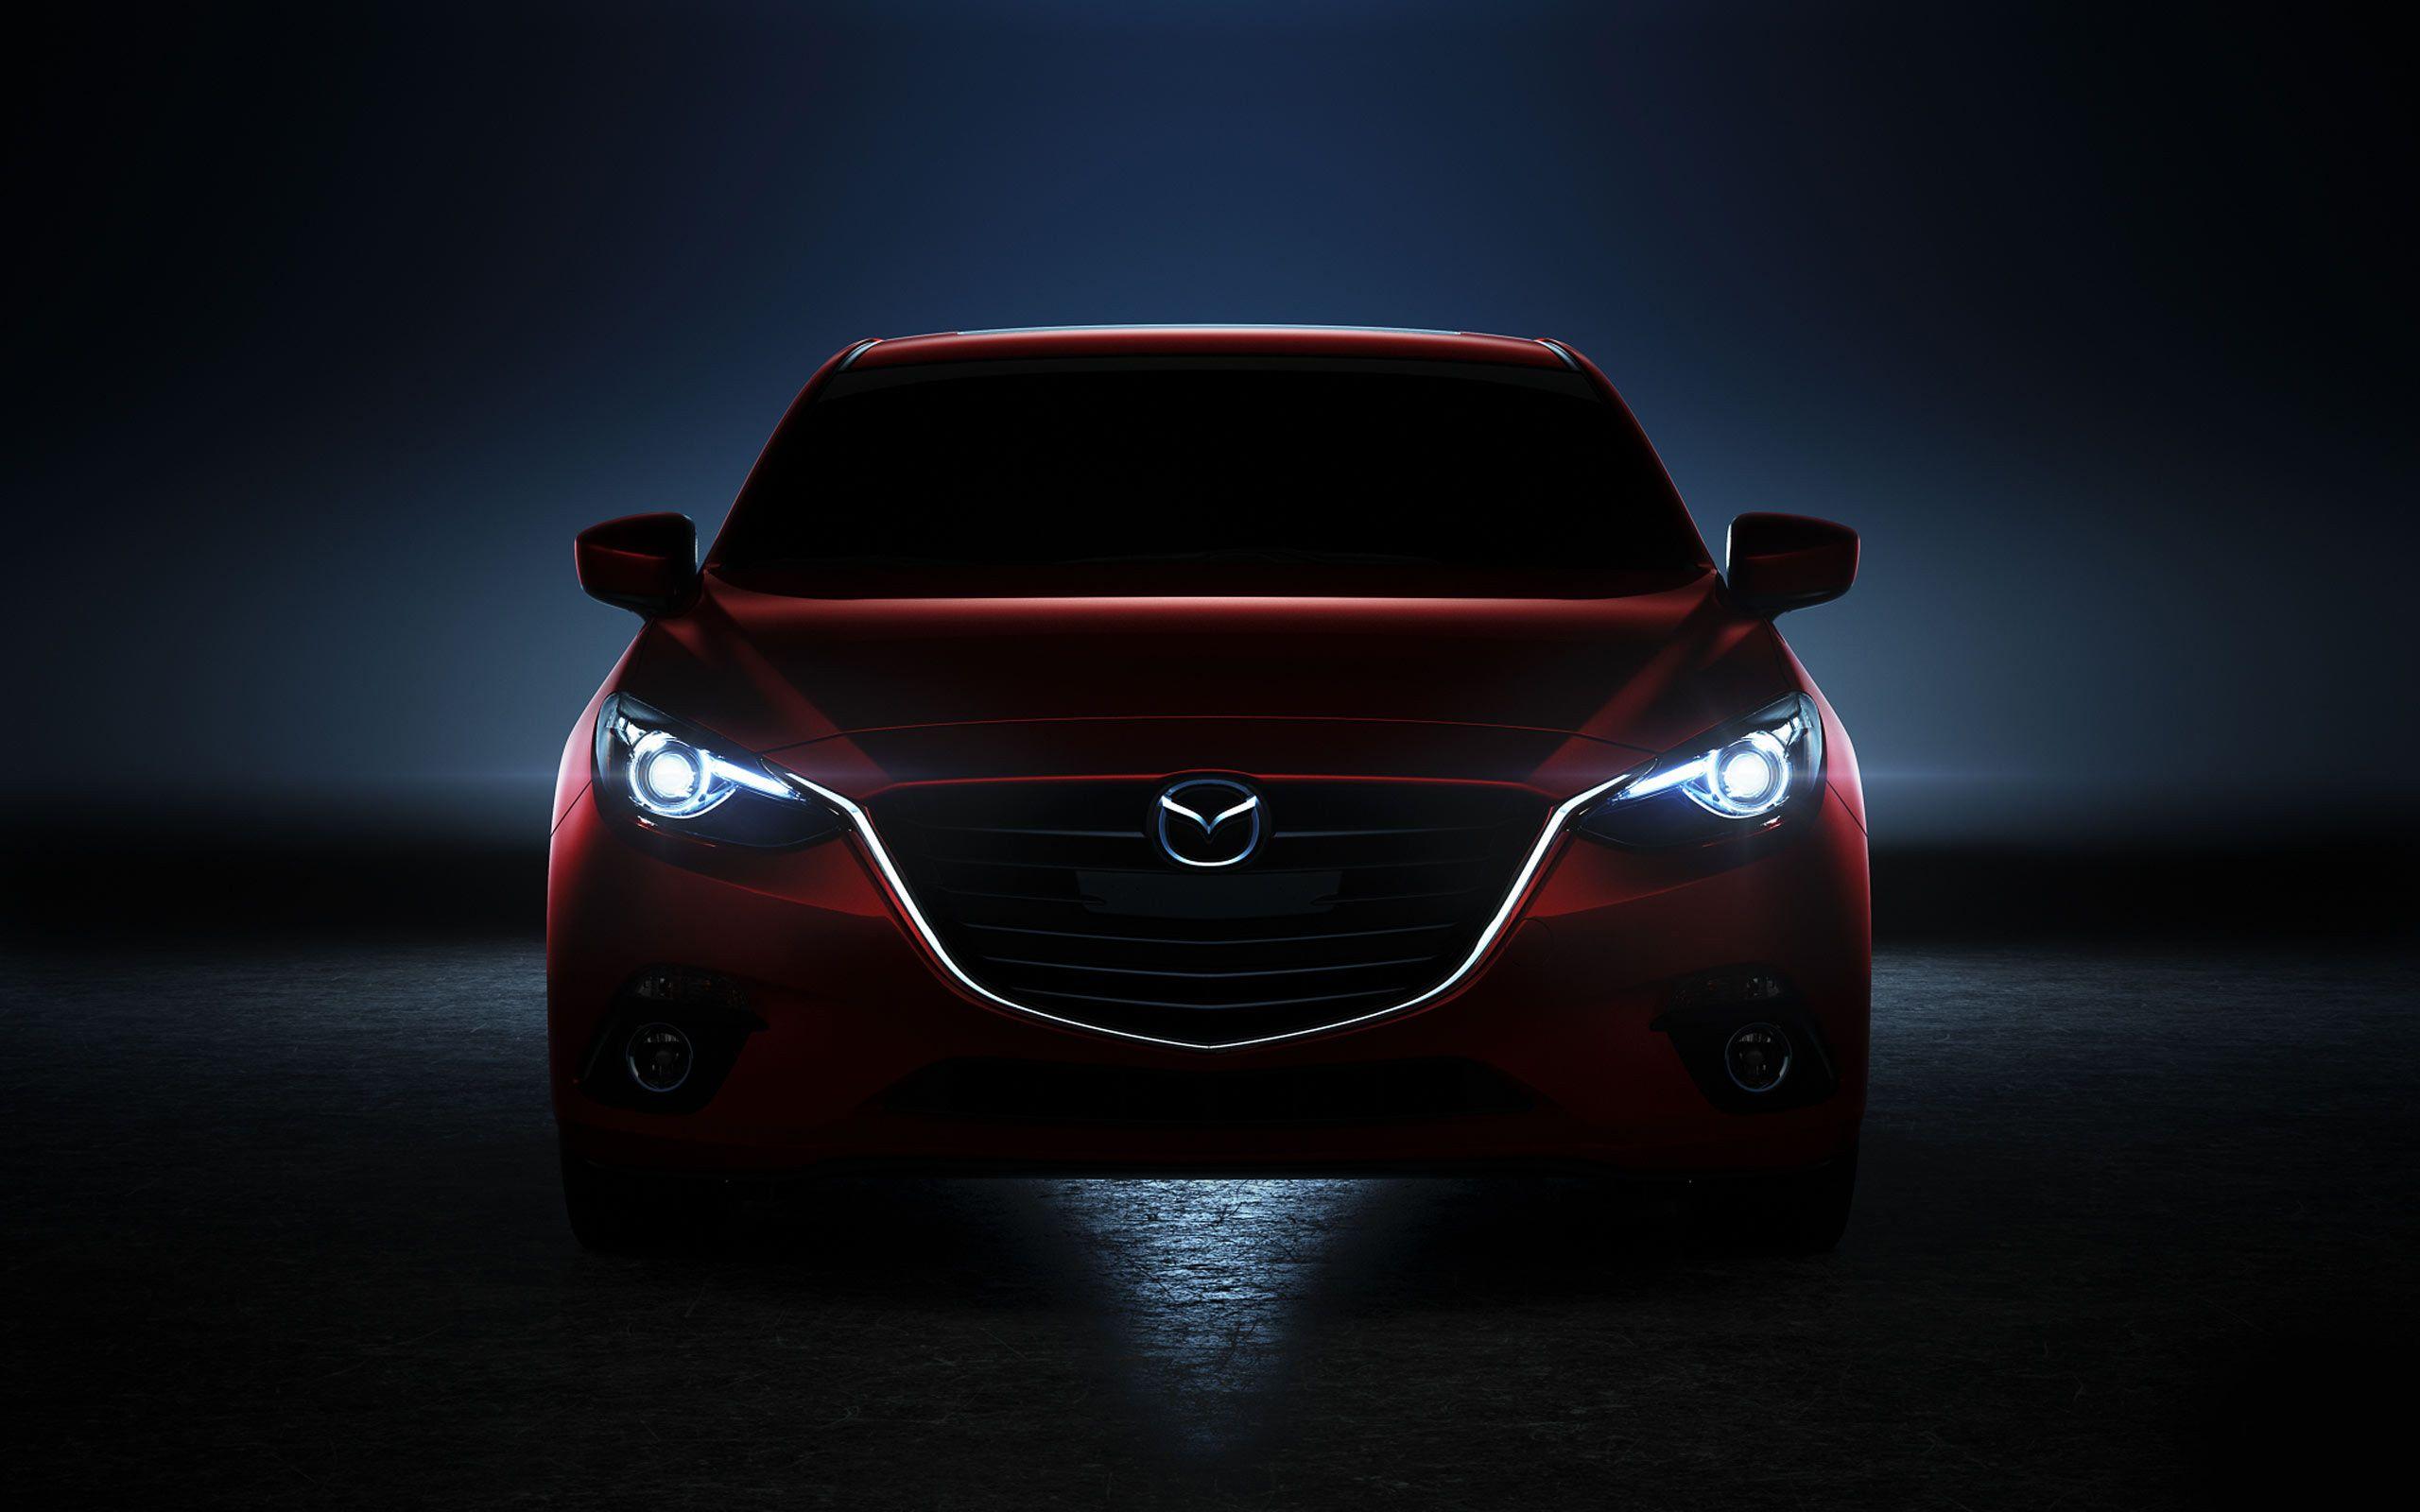 Coolest Collection of Mazda Car Wallpapers for Your Desktop